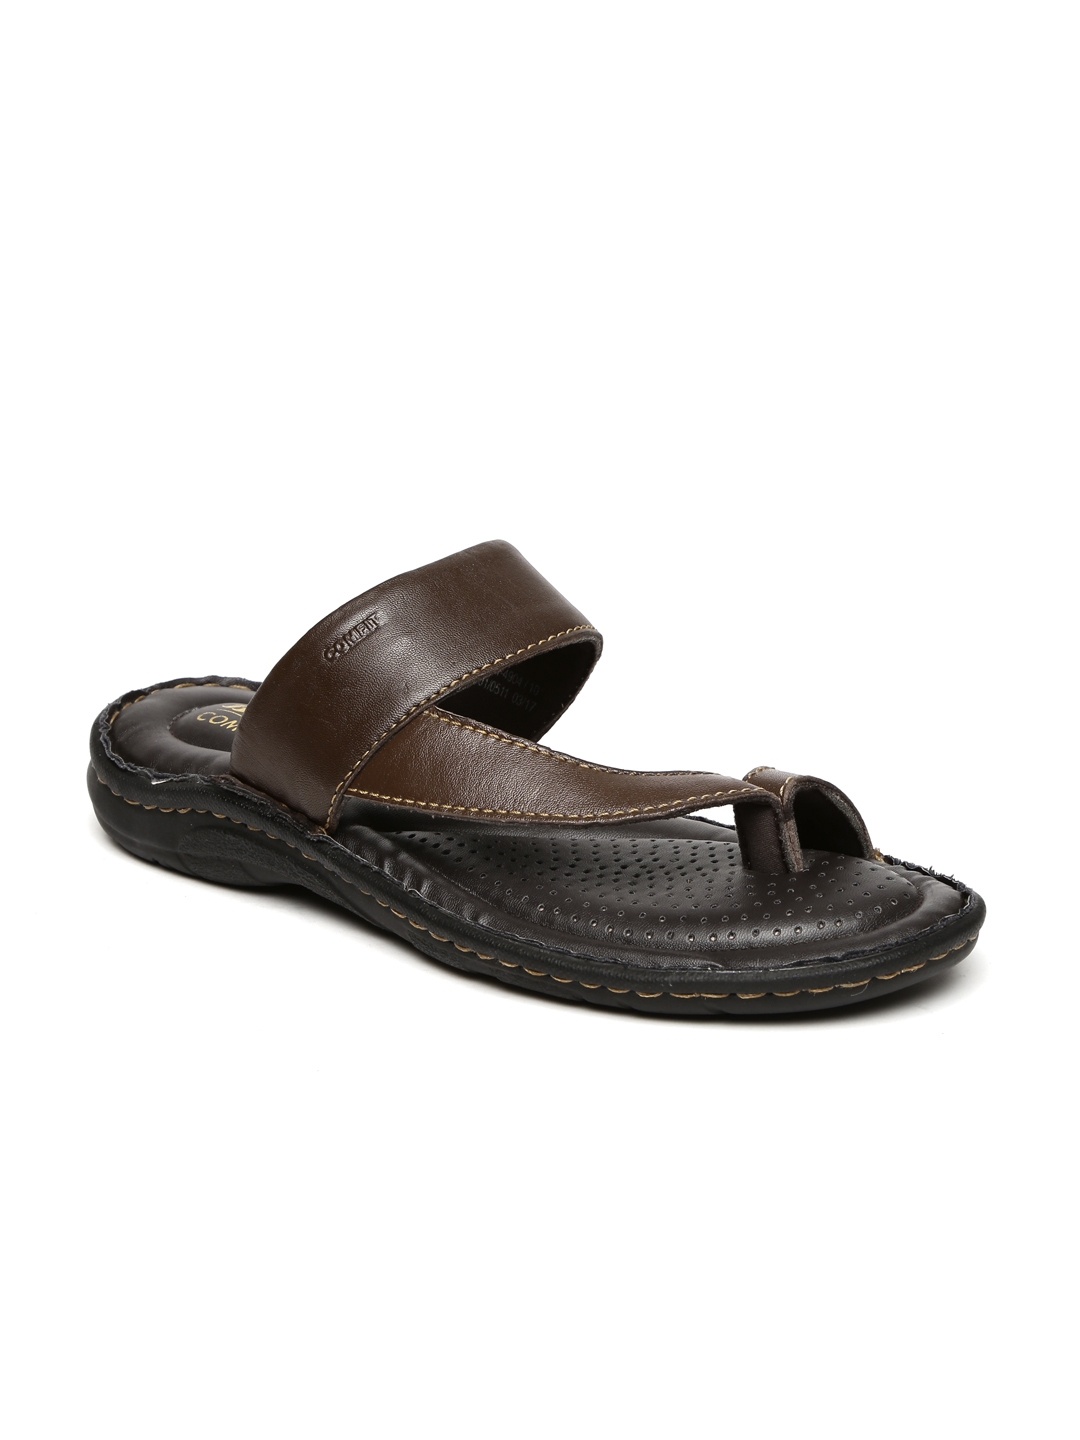 Synthetic Bata Black Sandals For Men F864600600 at Rs 1699/pair in Bengaluru-sgquangbinhtourist.com.vn